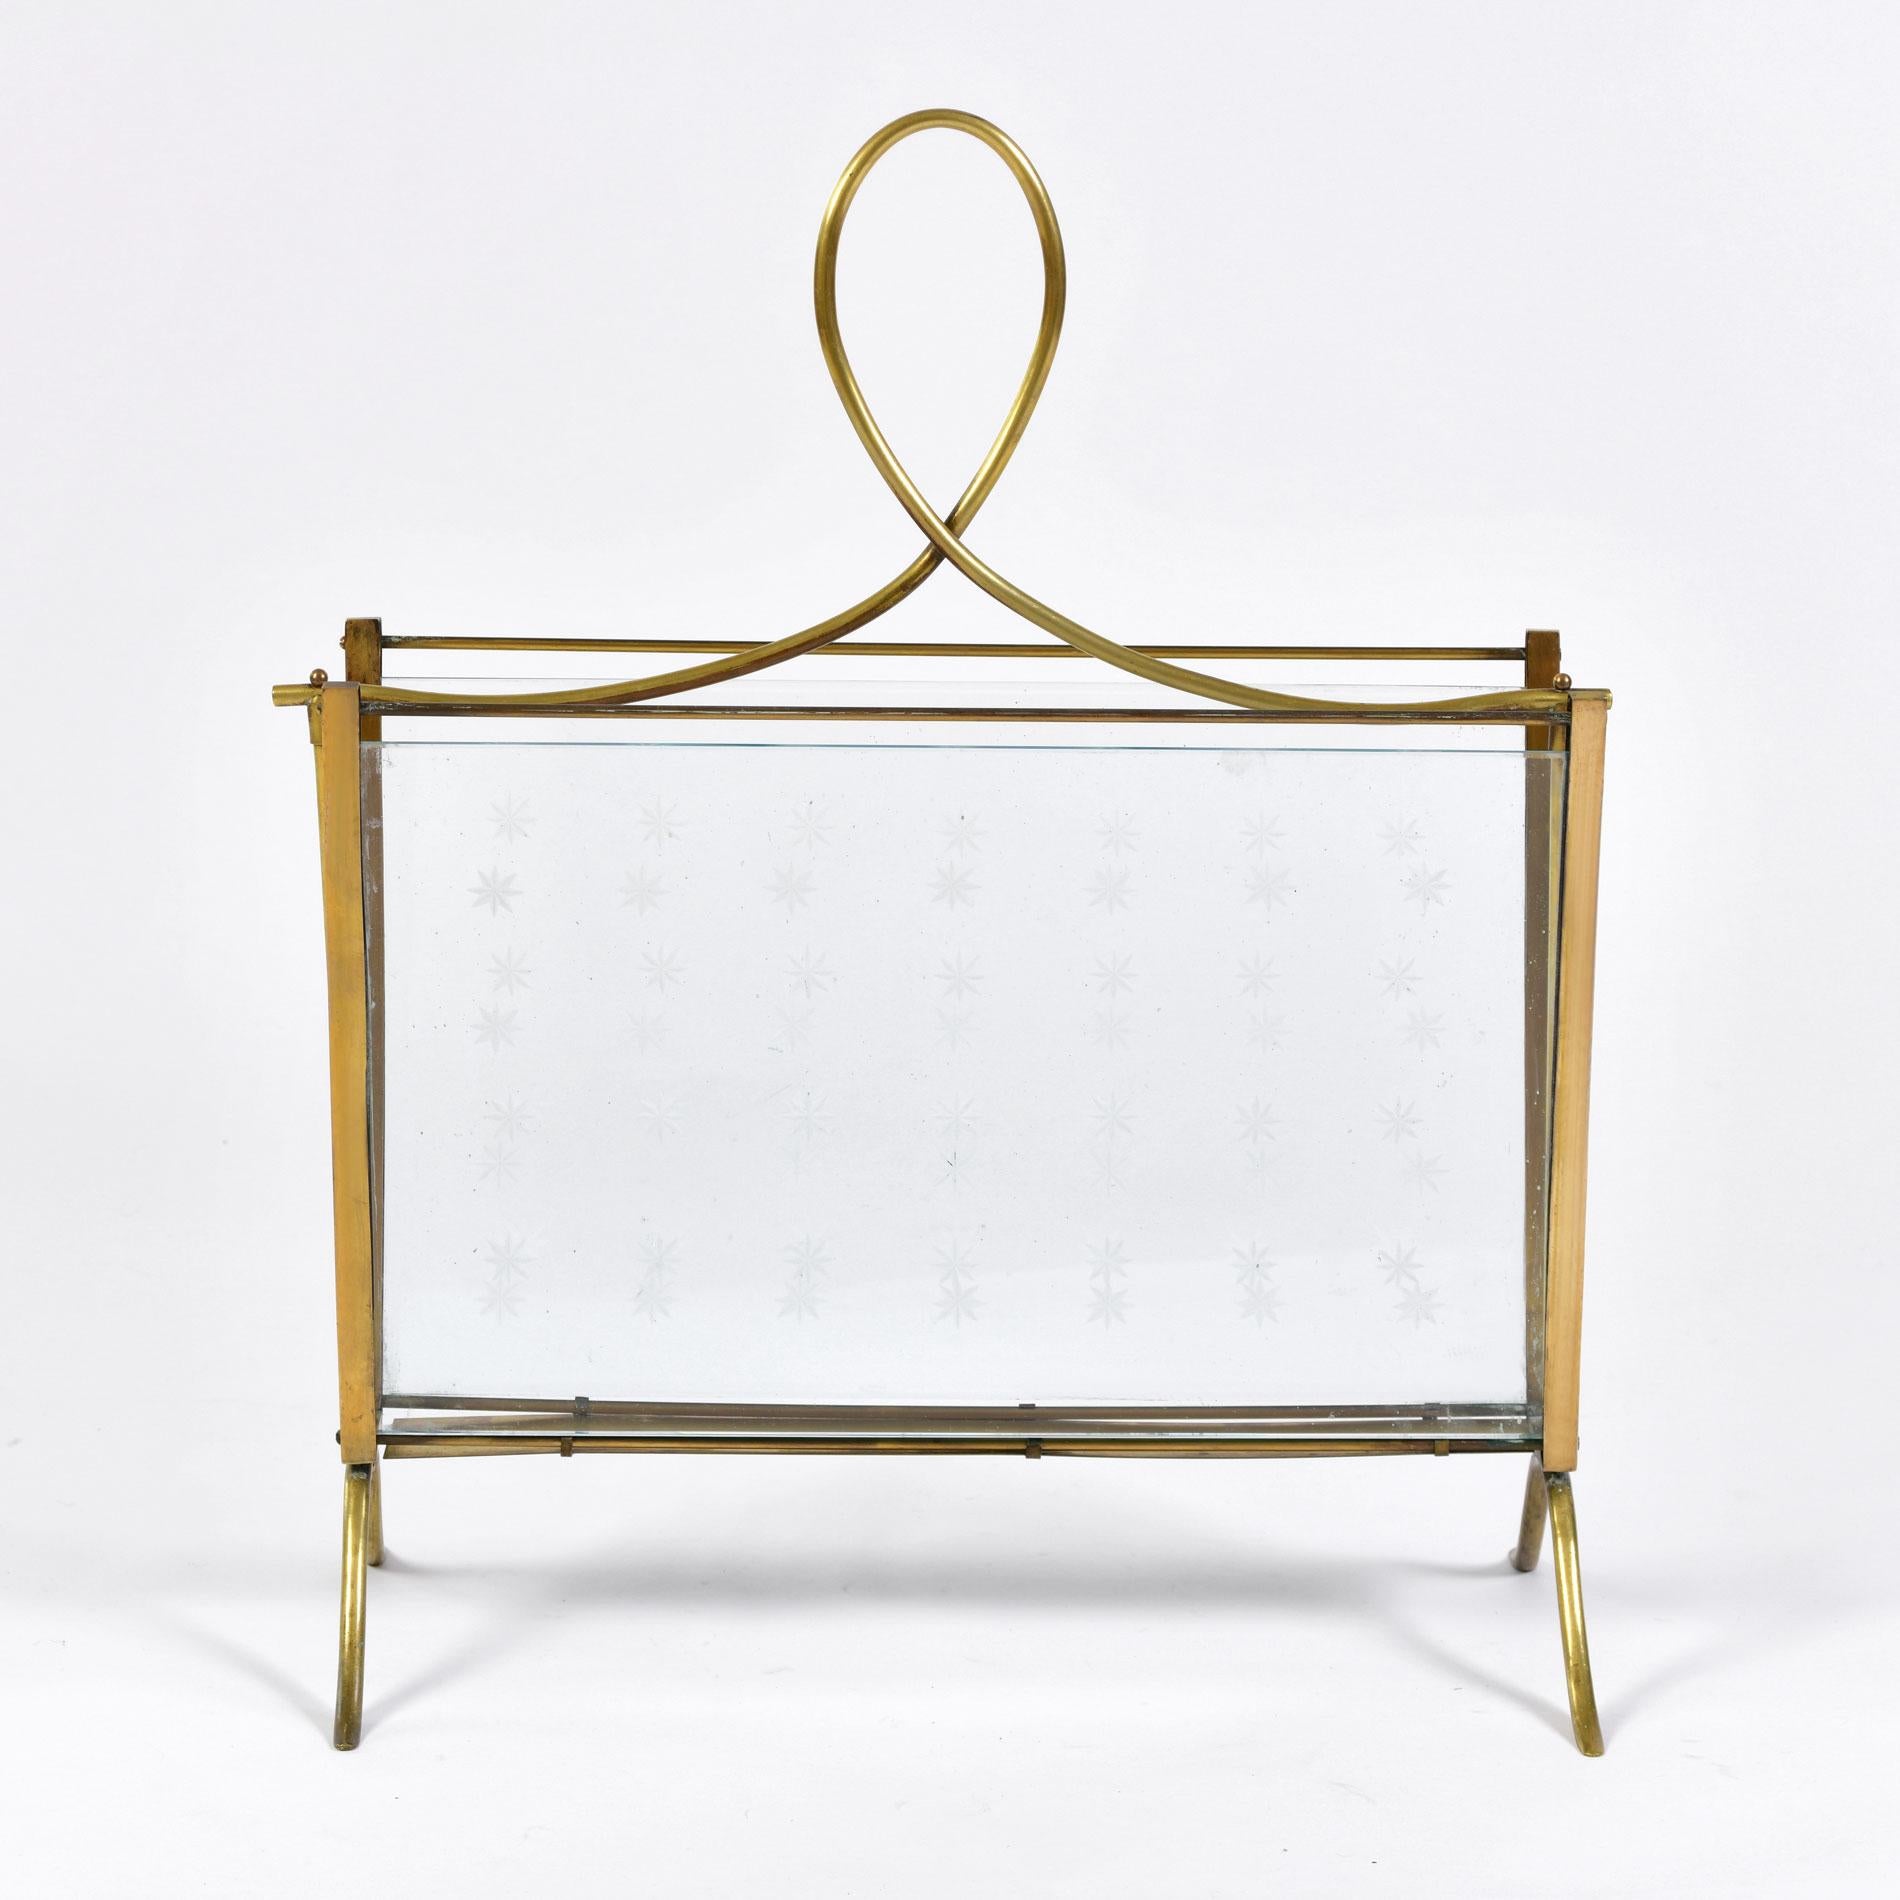 Decorative brass and glass magazine rack with etched 'star' pattern. Curved brass handle and feet.